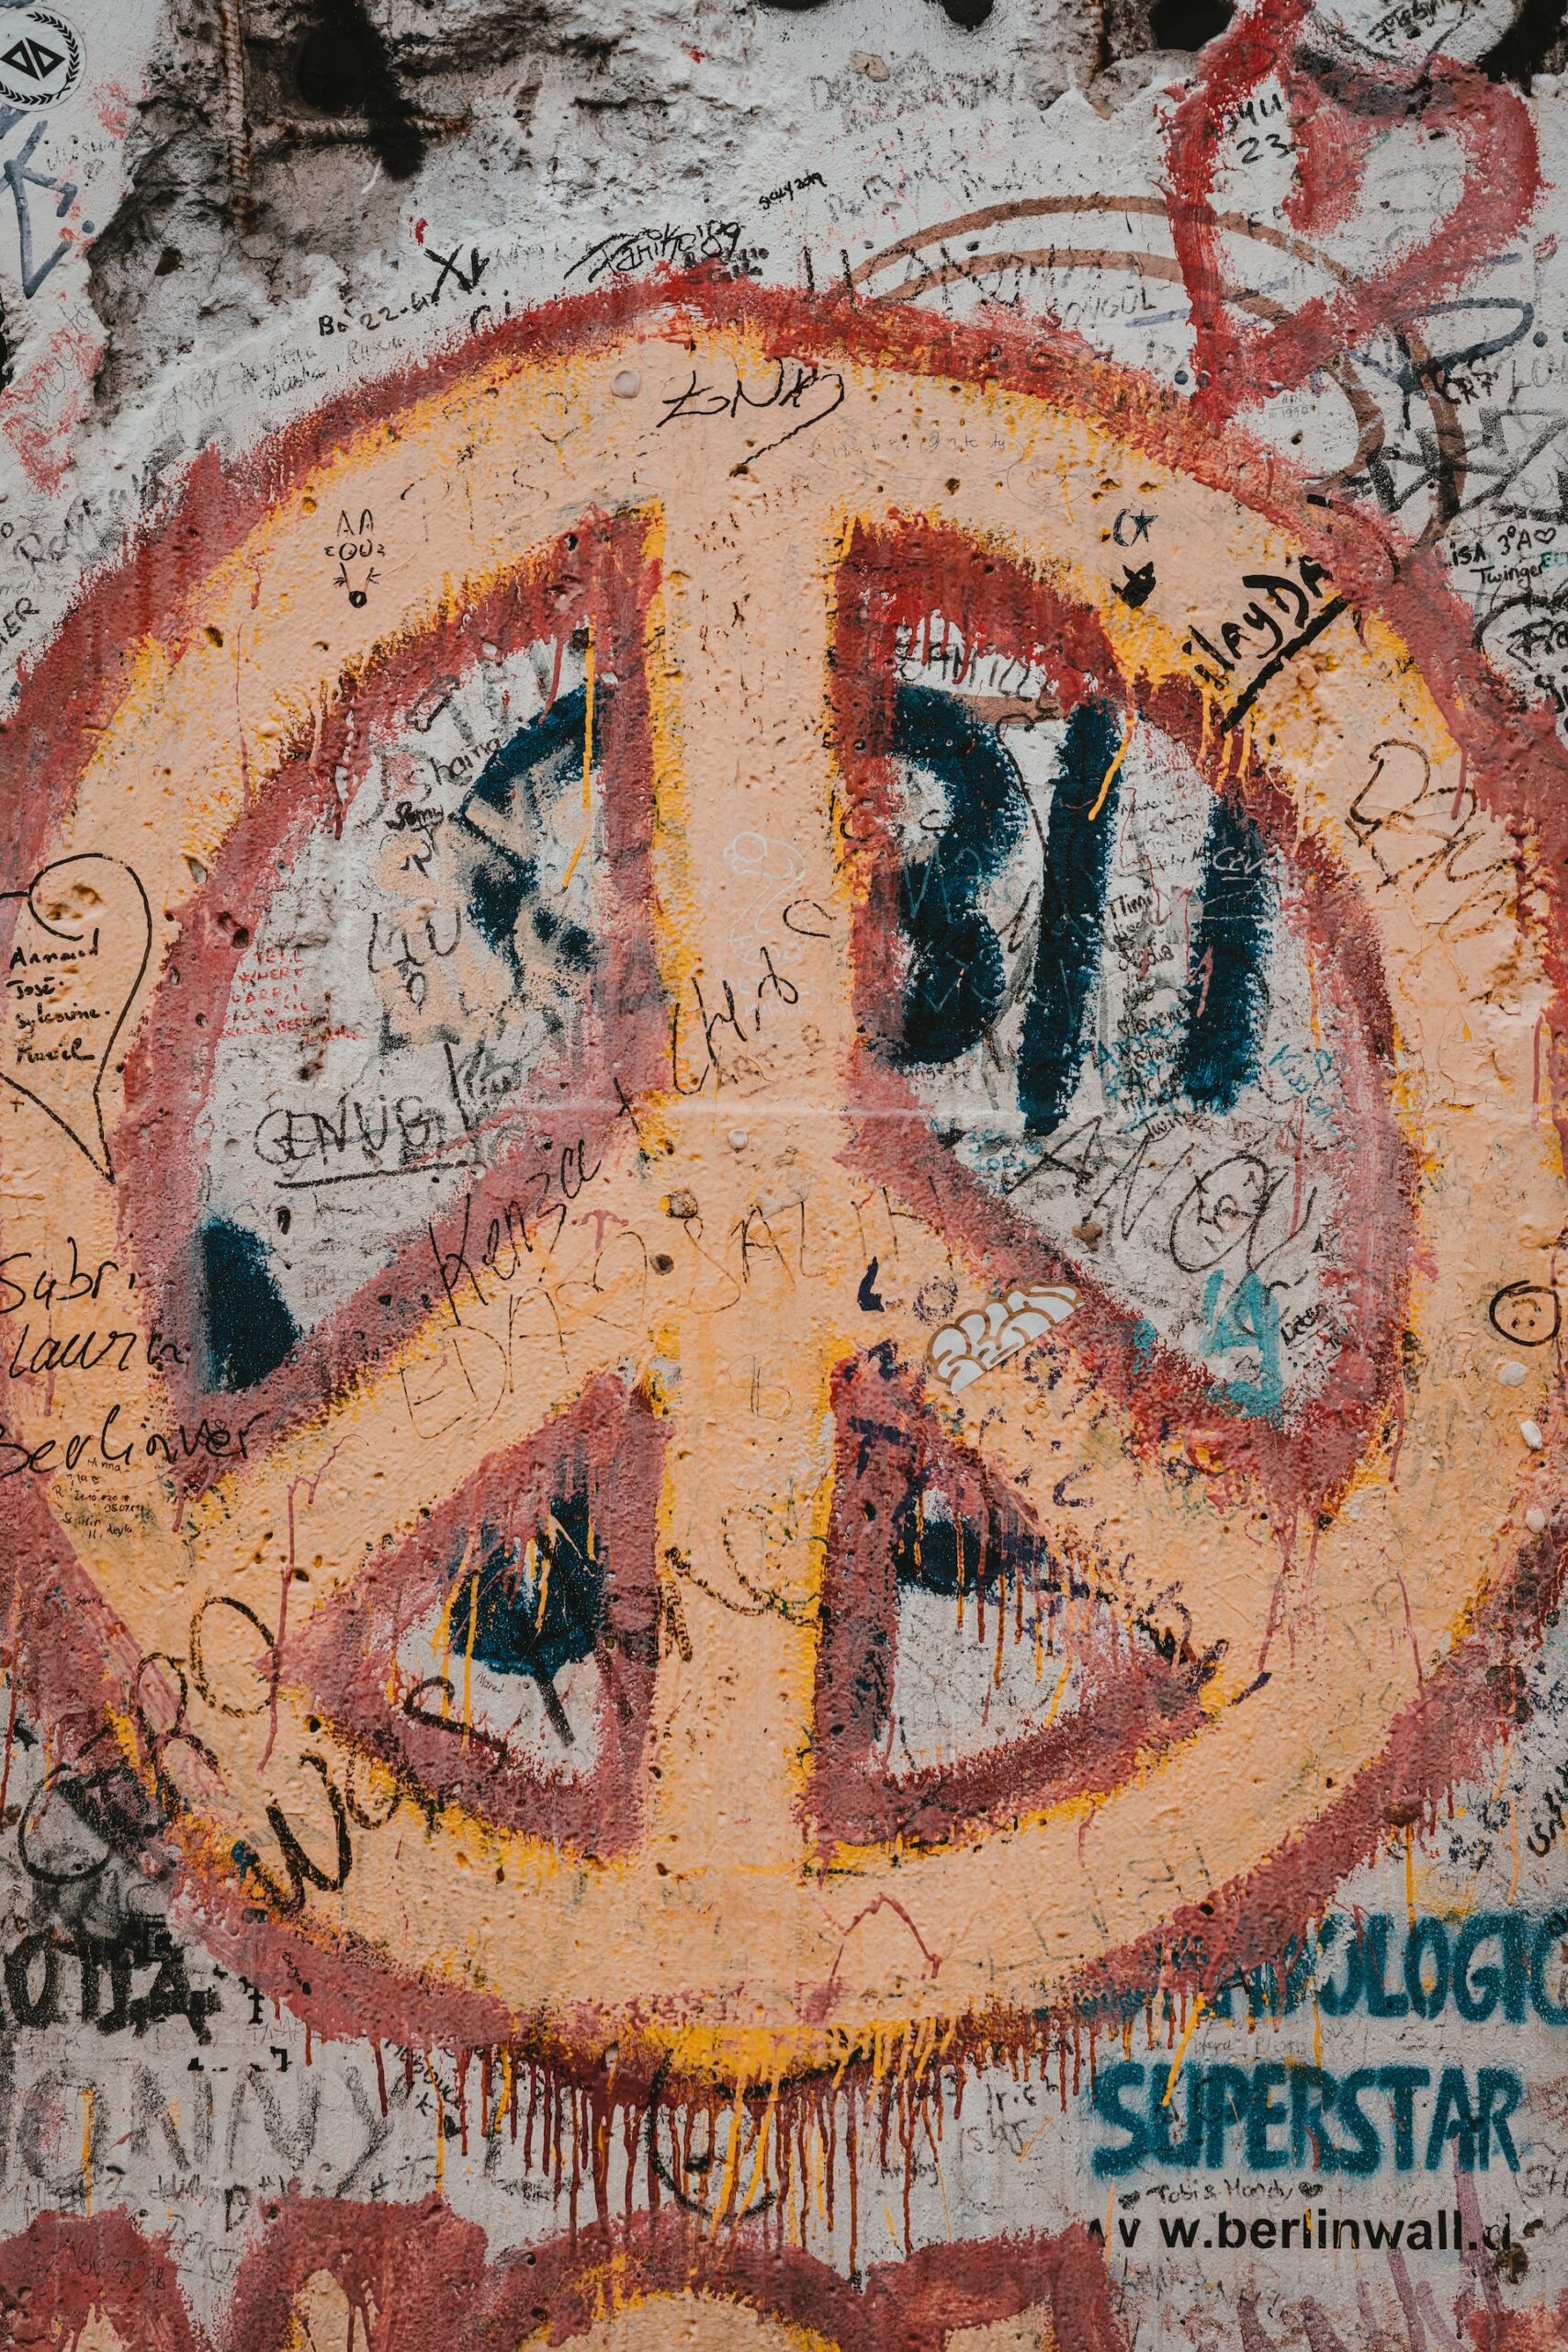 Peace sign spray painted on section of the Berlin Wall.